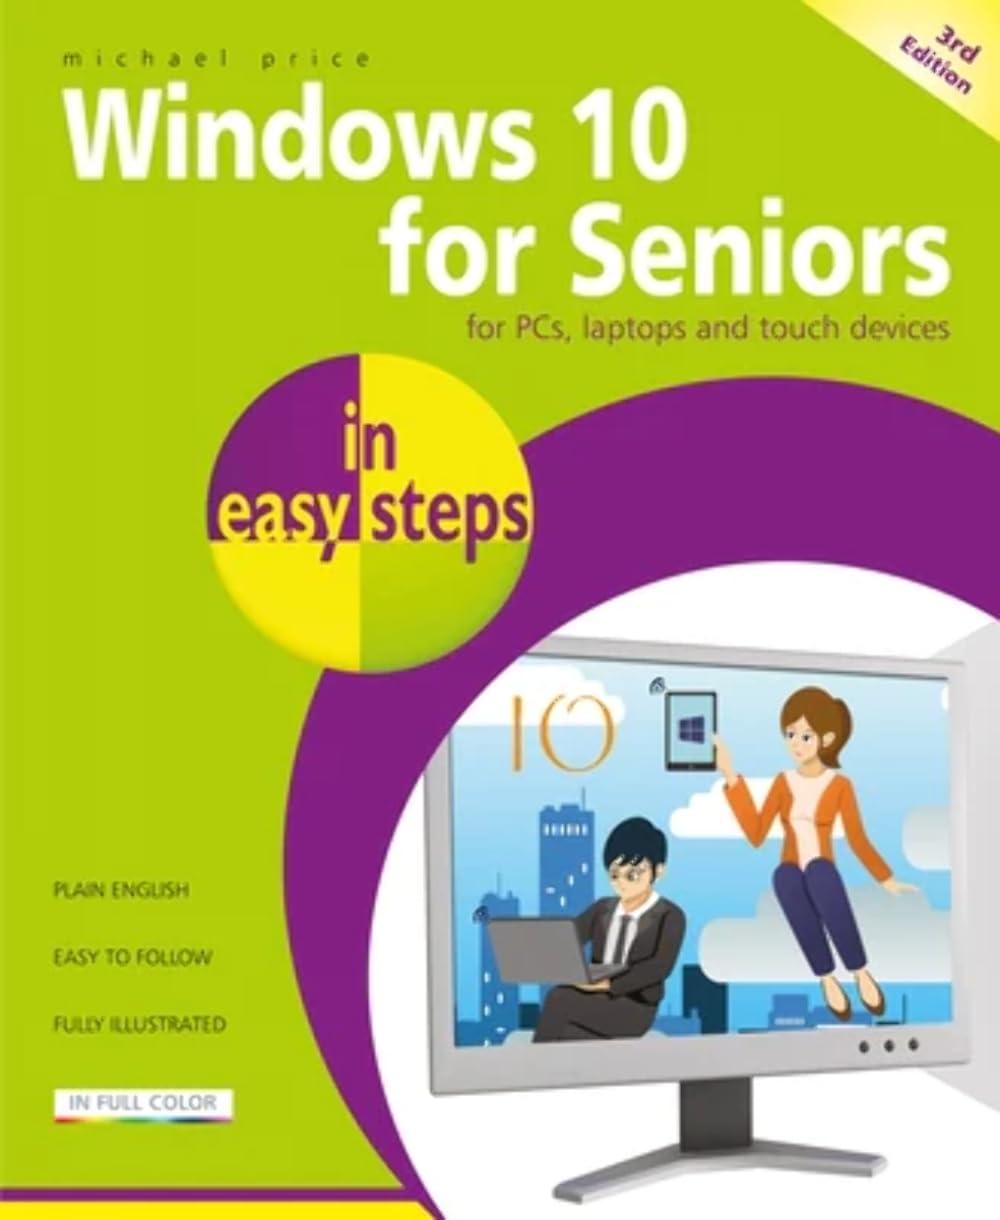 windows 10 for seniors in easy steps 3rd edition michael price 1840788119, 978-1840788112